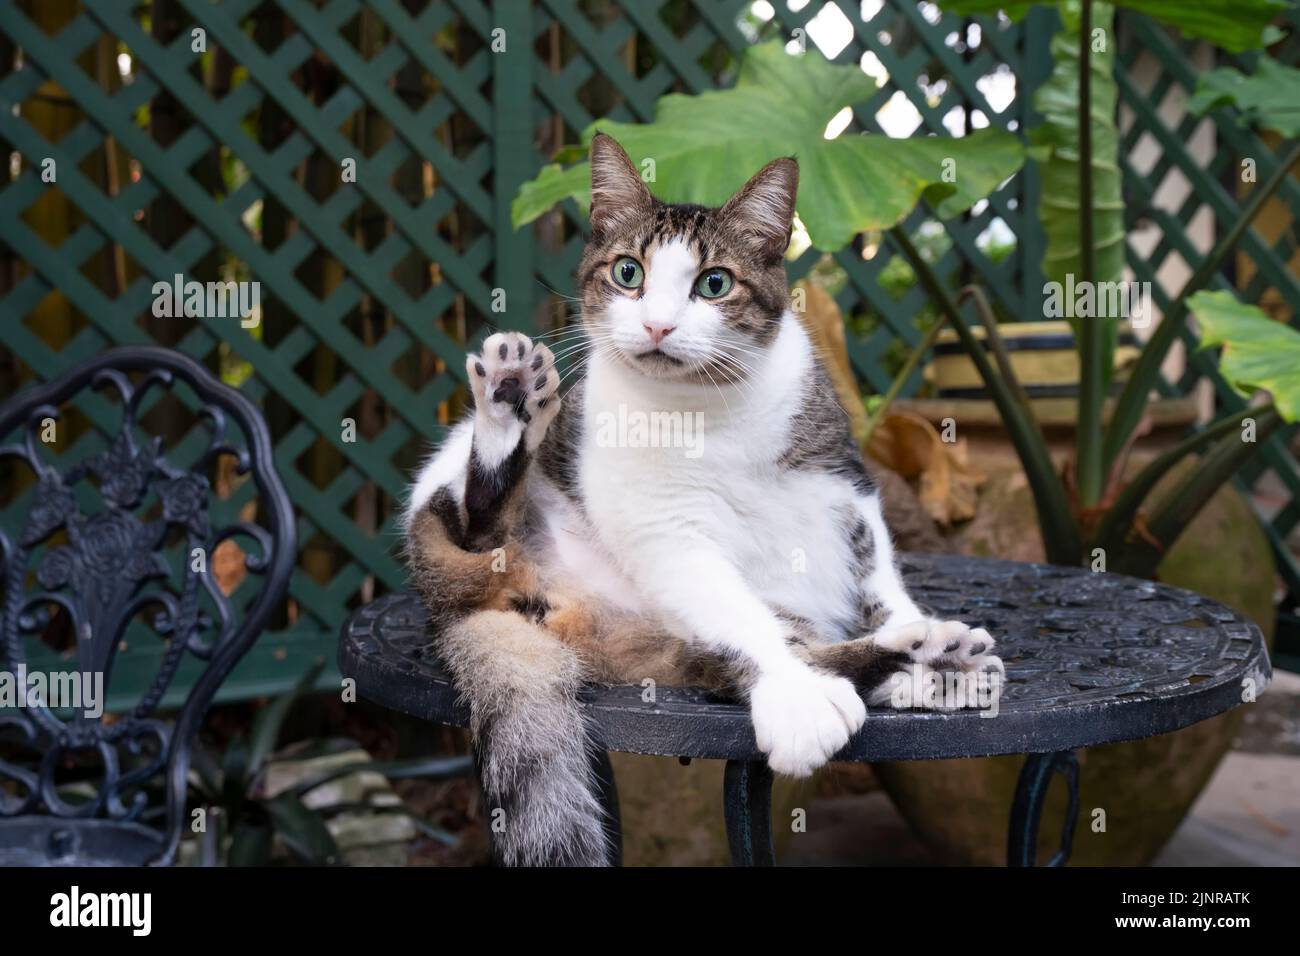 Billie Holiday, one of 61 cats living at the Ernest Hemingway Home and Museum in Key West, Florida, takes a break in the home’s rear garden. Stock Photo